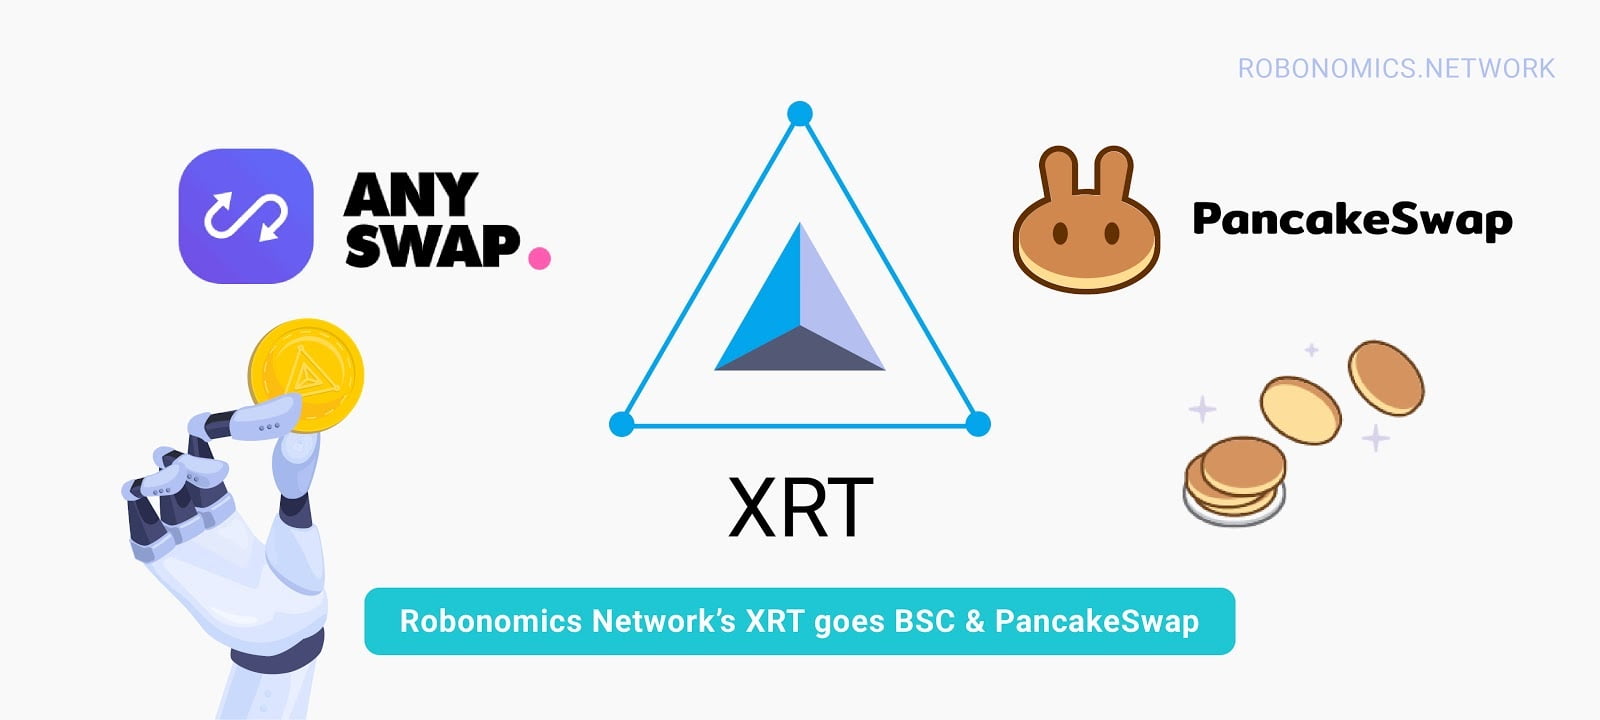 Robonomics expansion: XRT goes to BSC & PancakeSwap